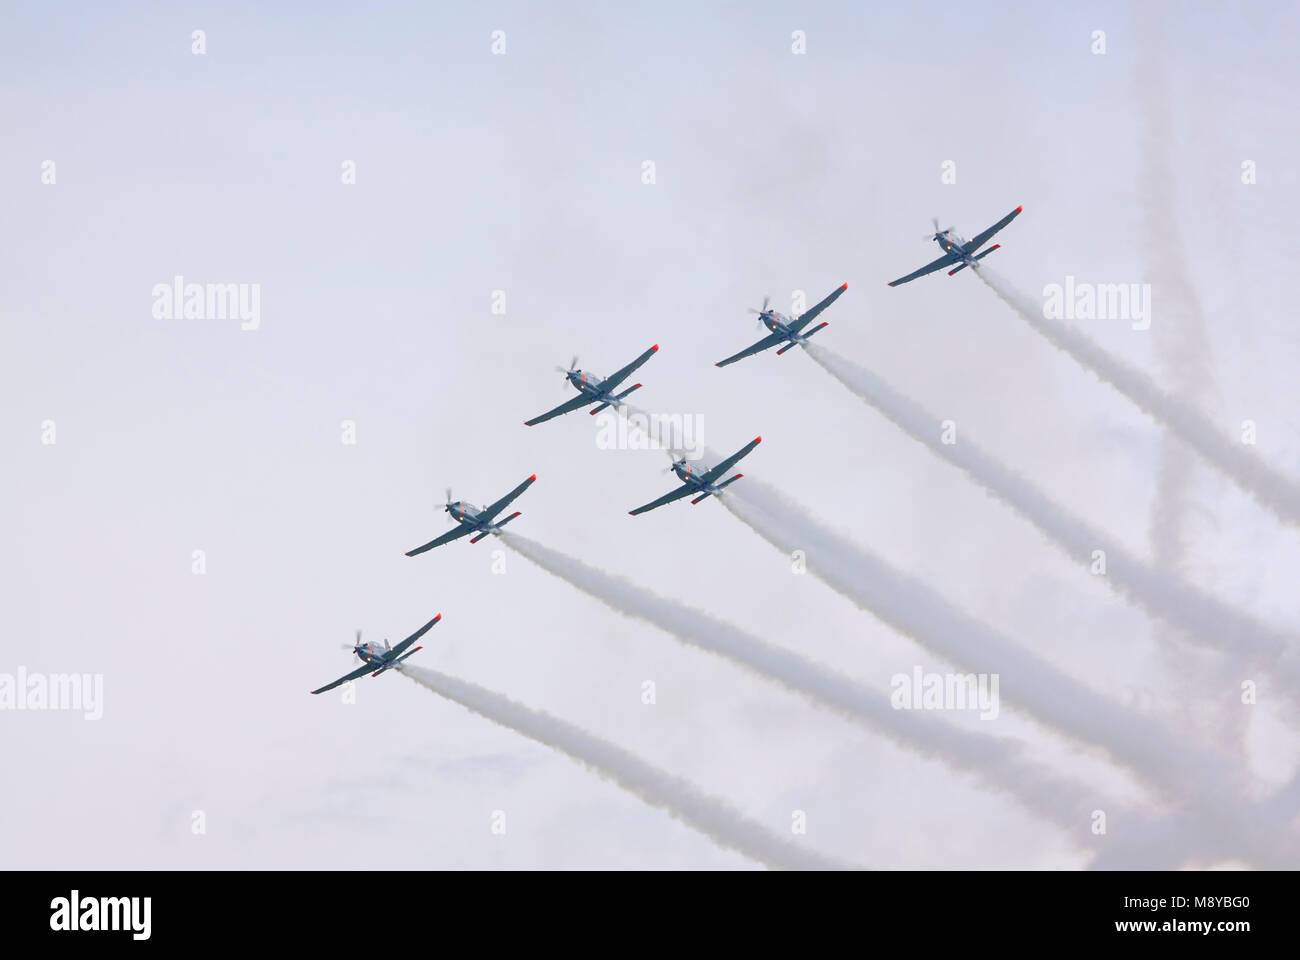 The Polish Air Force Orlik Aerobatics Team Flying Over Sky During International Air Show At The